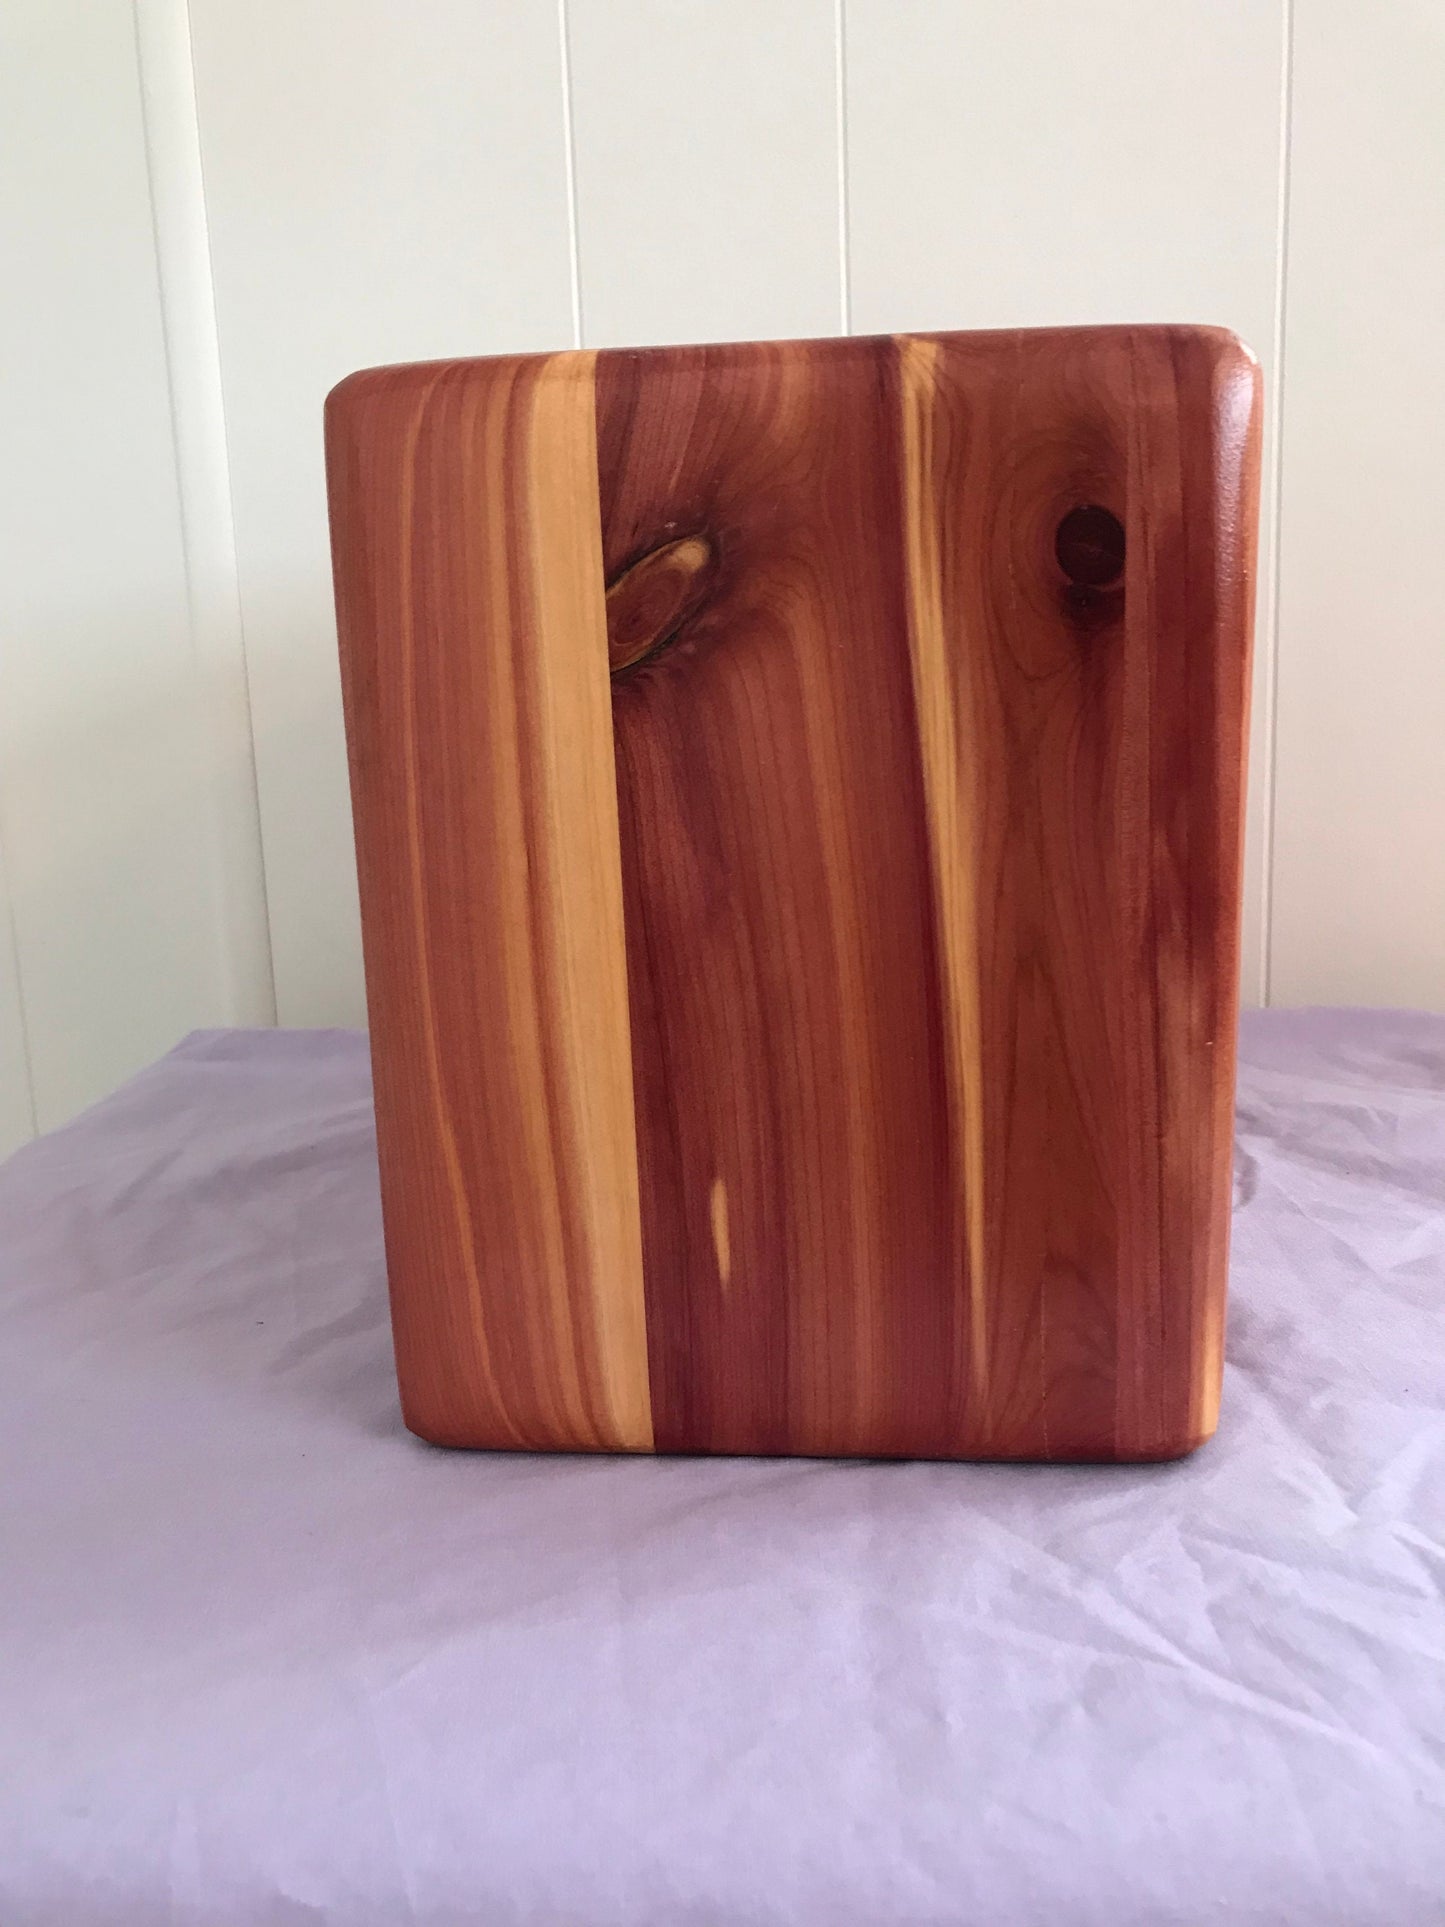 Aromatic Cedar Cremation Urn for Adult Human Ashes, up to 300 pounds, Naturalist model